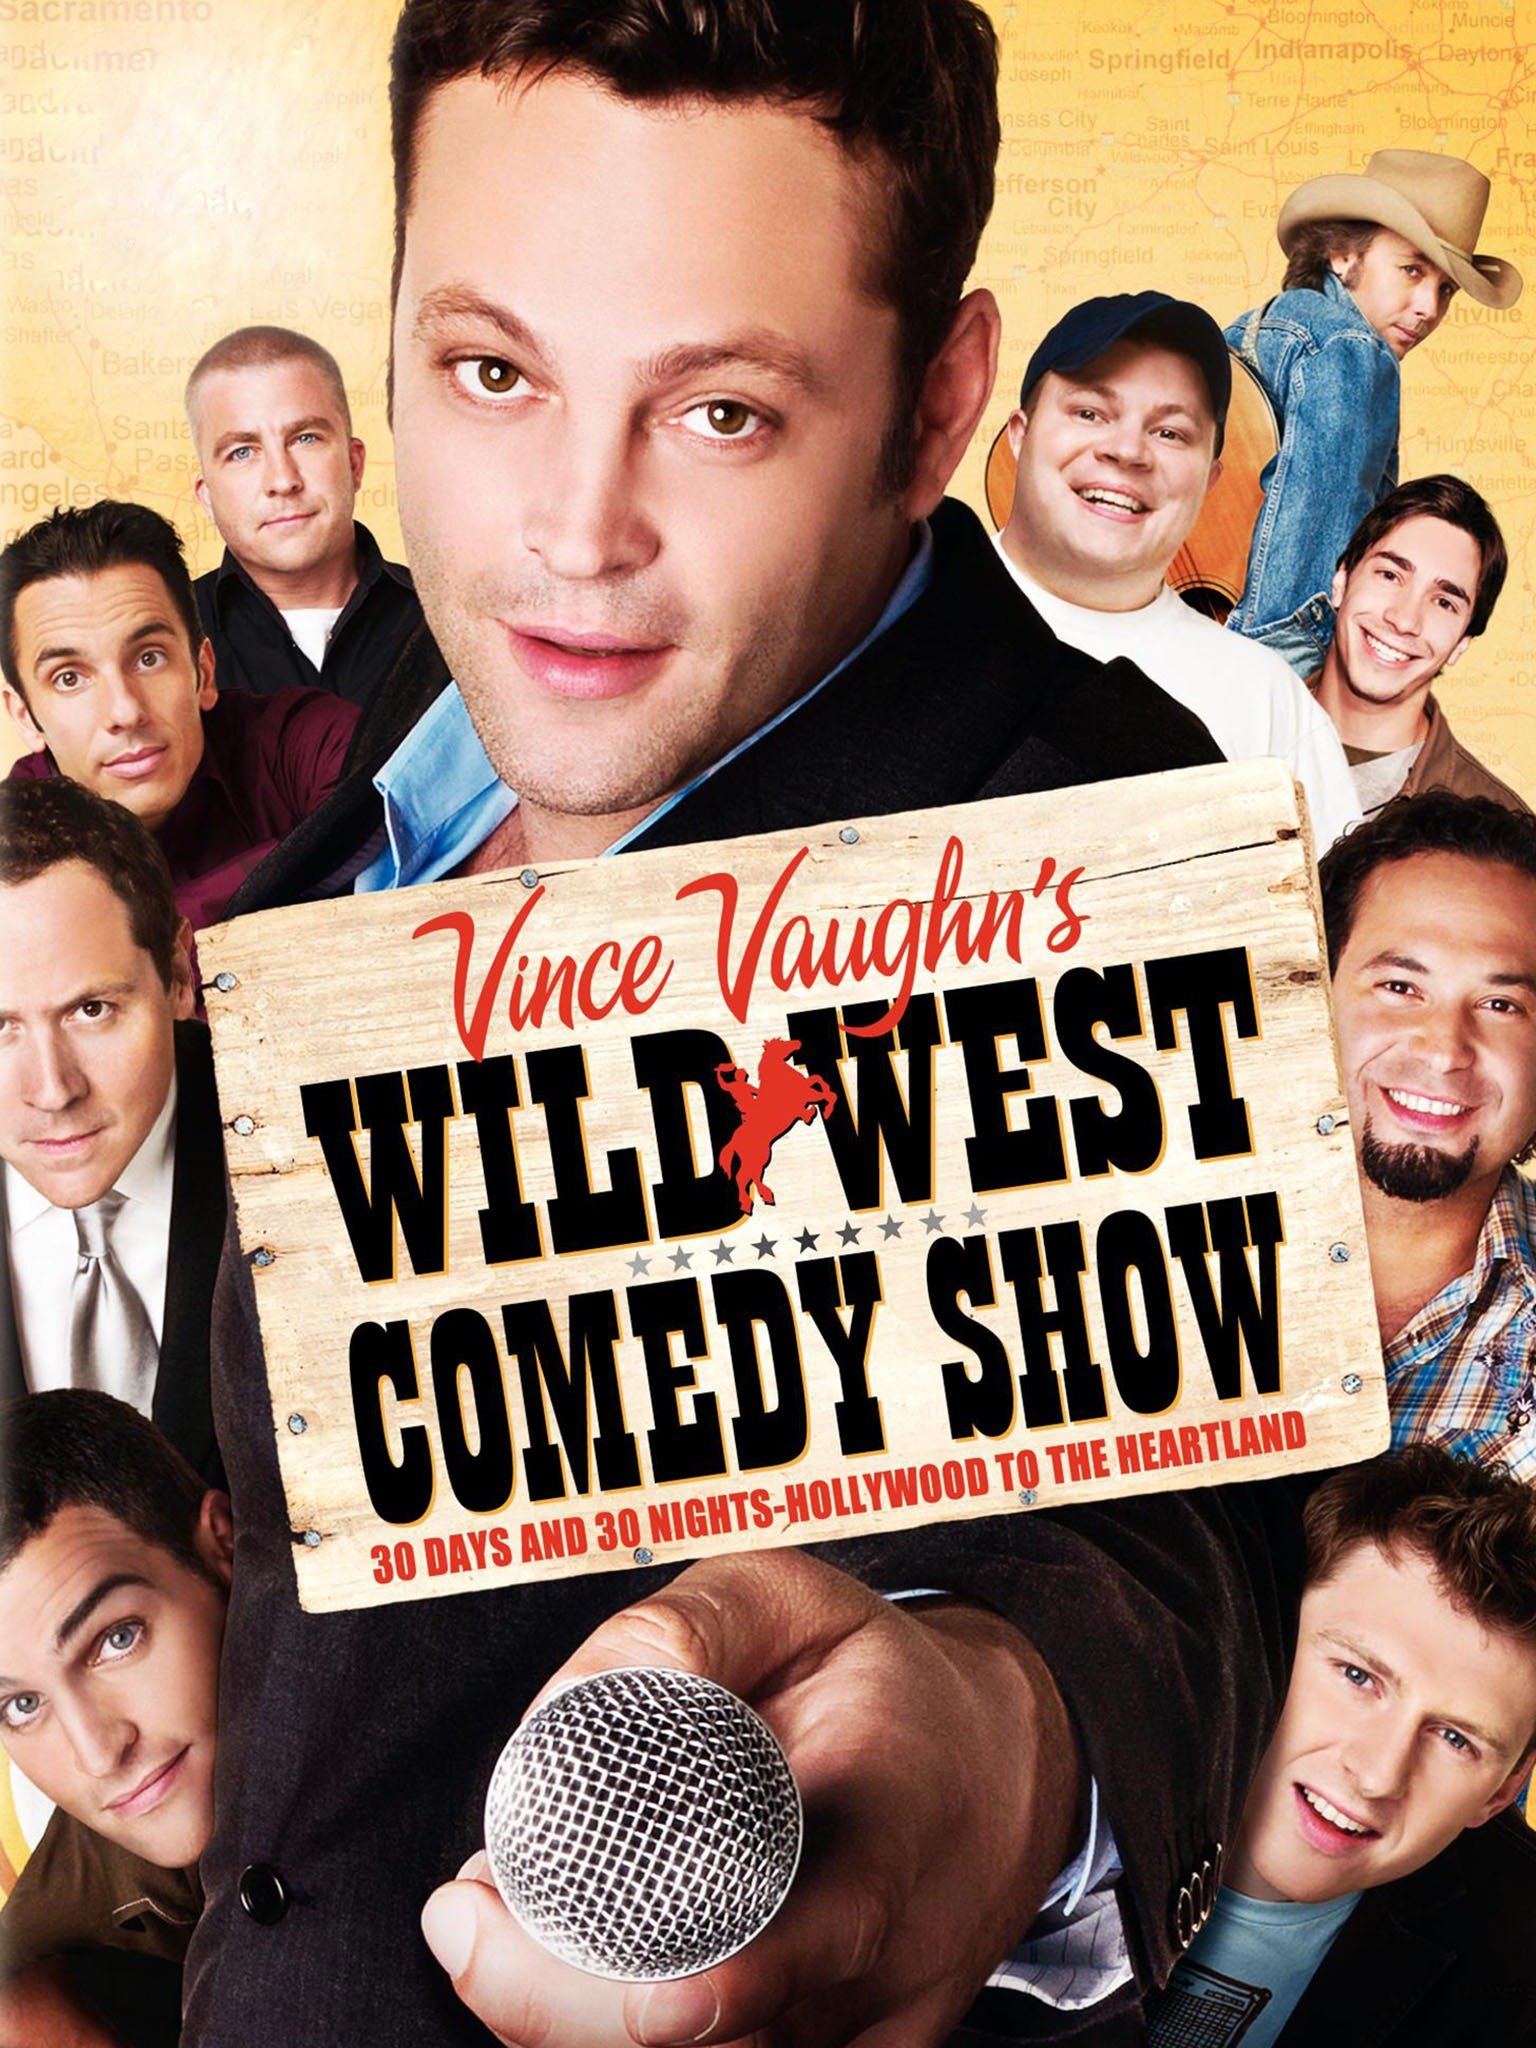 Vince Vaughns Wild West Comedy Show 30 Days and 30 Nights - Hollywood to the Heartland picture picture